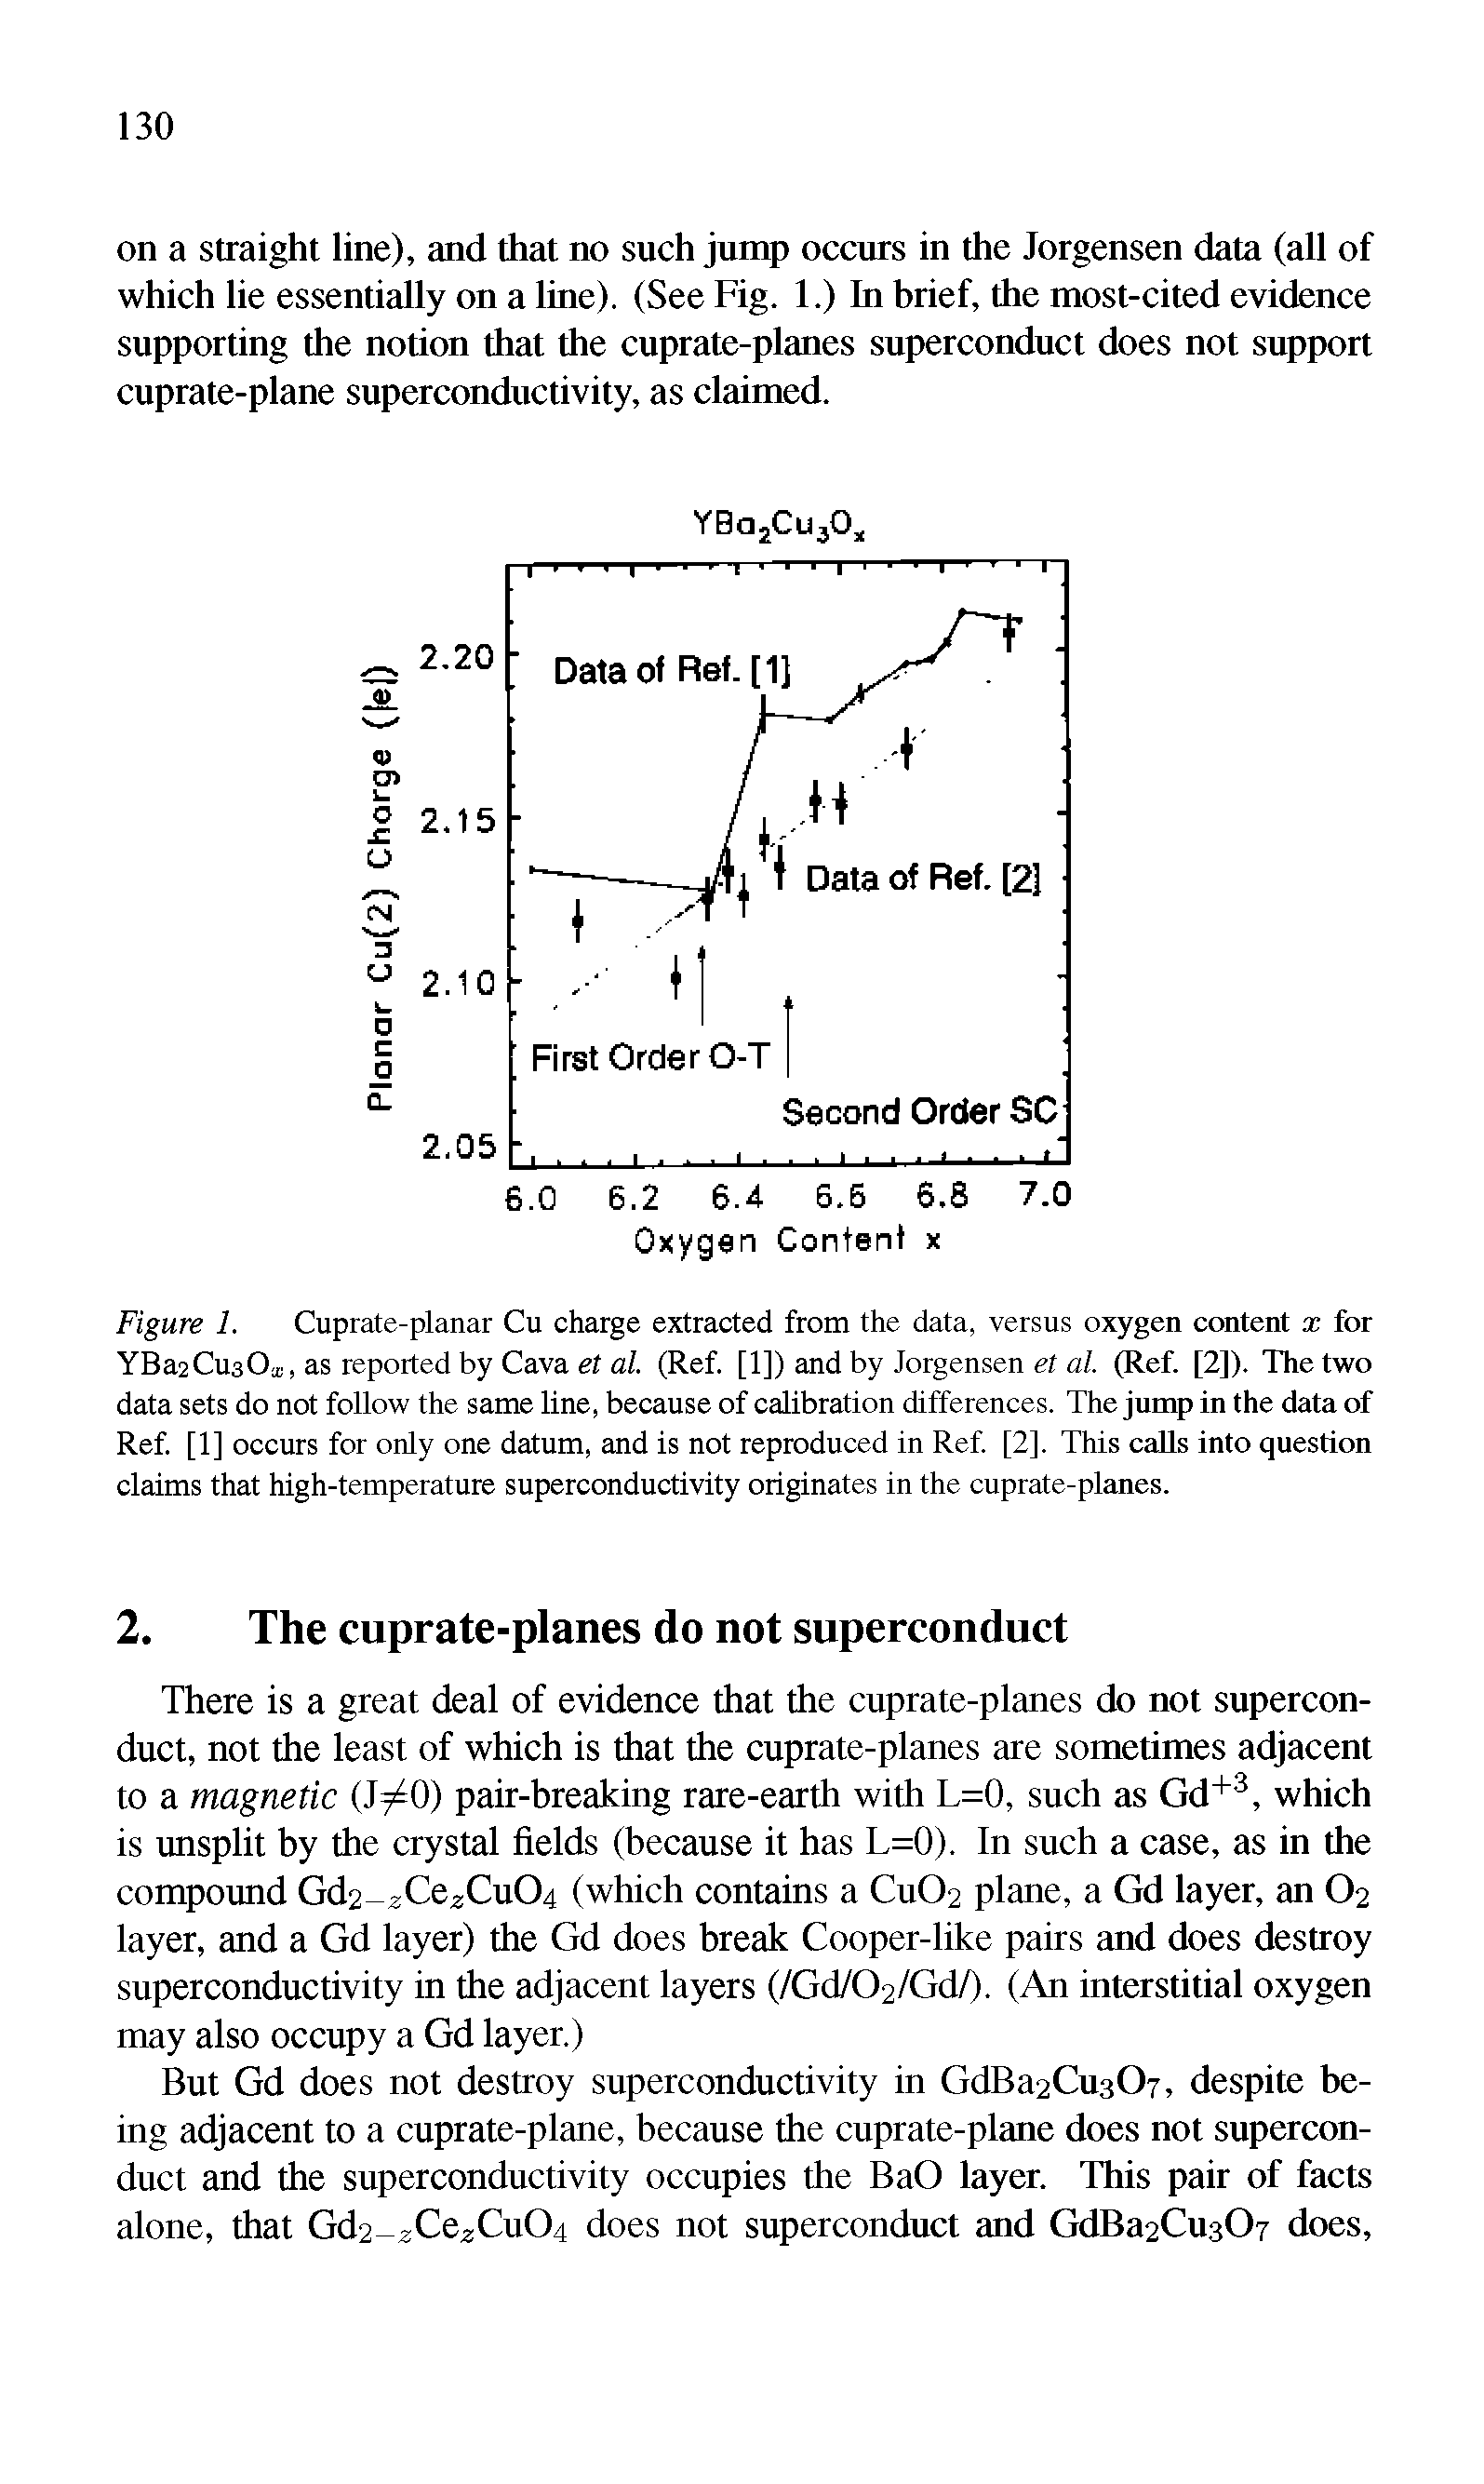 Figure 1. Cuprate-planar Cu charge extracted from the data, versus oxygen content x for YBa2Cu30x, as reported by Cava et al. (Ref. [1]) and by Jorgensen et al. (Ref. [2]). The two data sets do not follow the same line, because of calibration differences. The jump in the data of Ref. [1] occurs for only one datum, and is not reproduced in Ref. [2]. This calls into question claims that high-temperature superconductivity originates in the cuprate-planes.